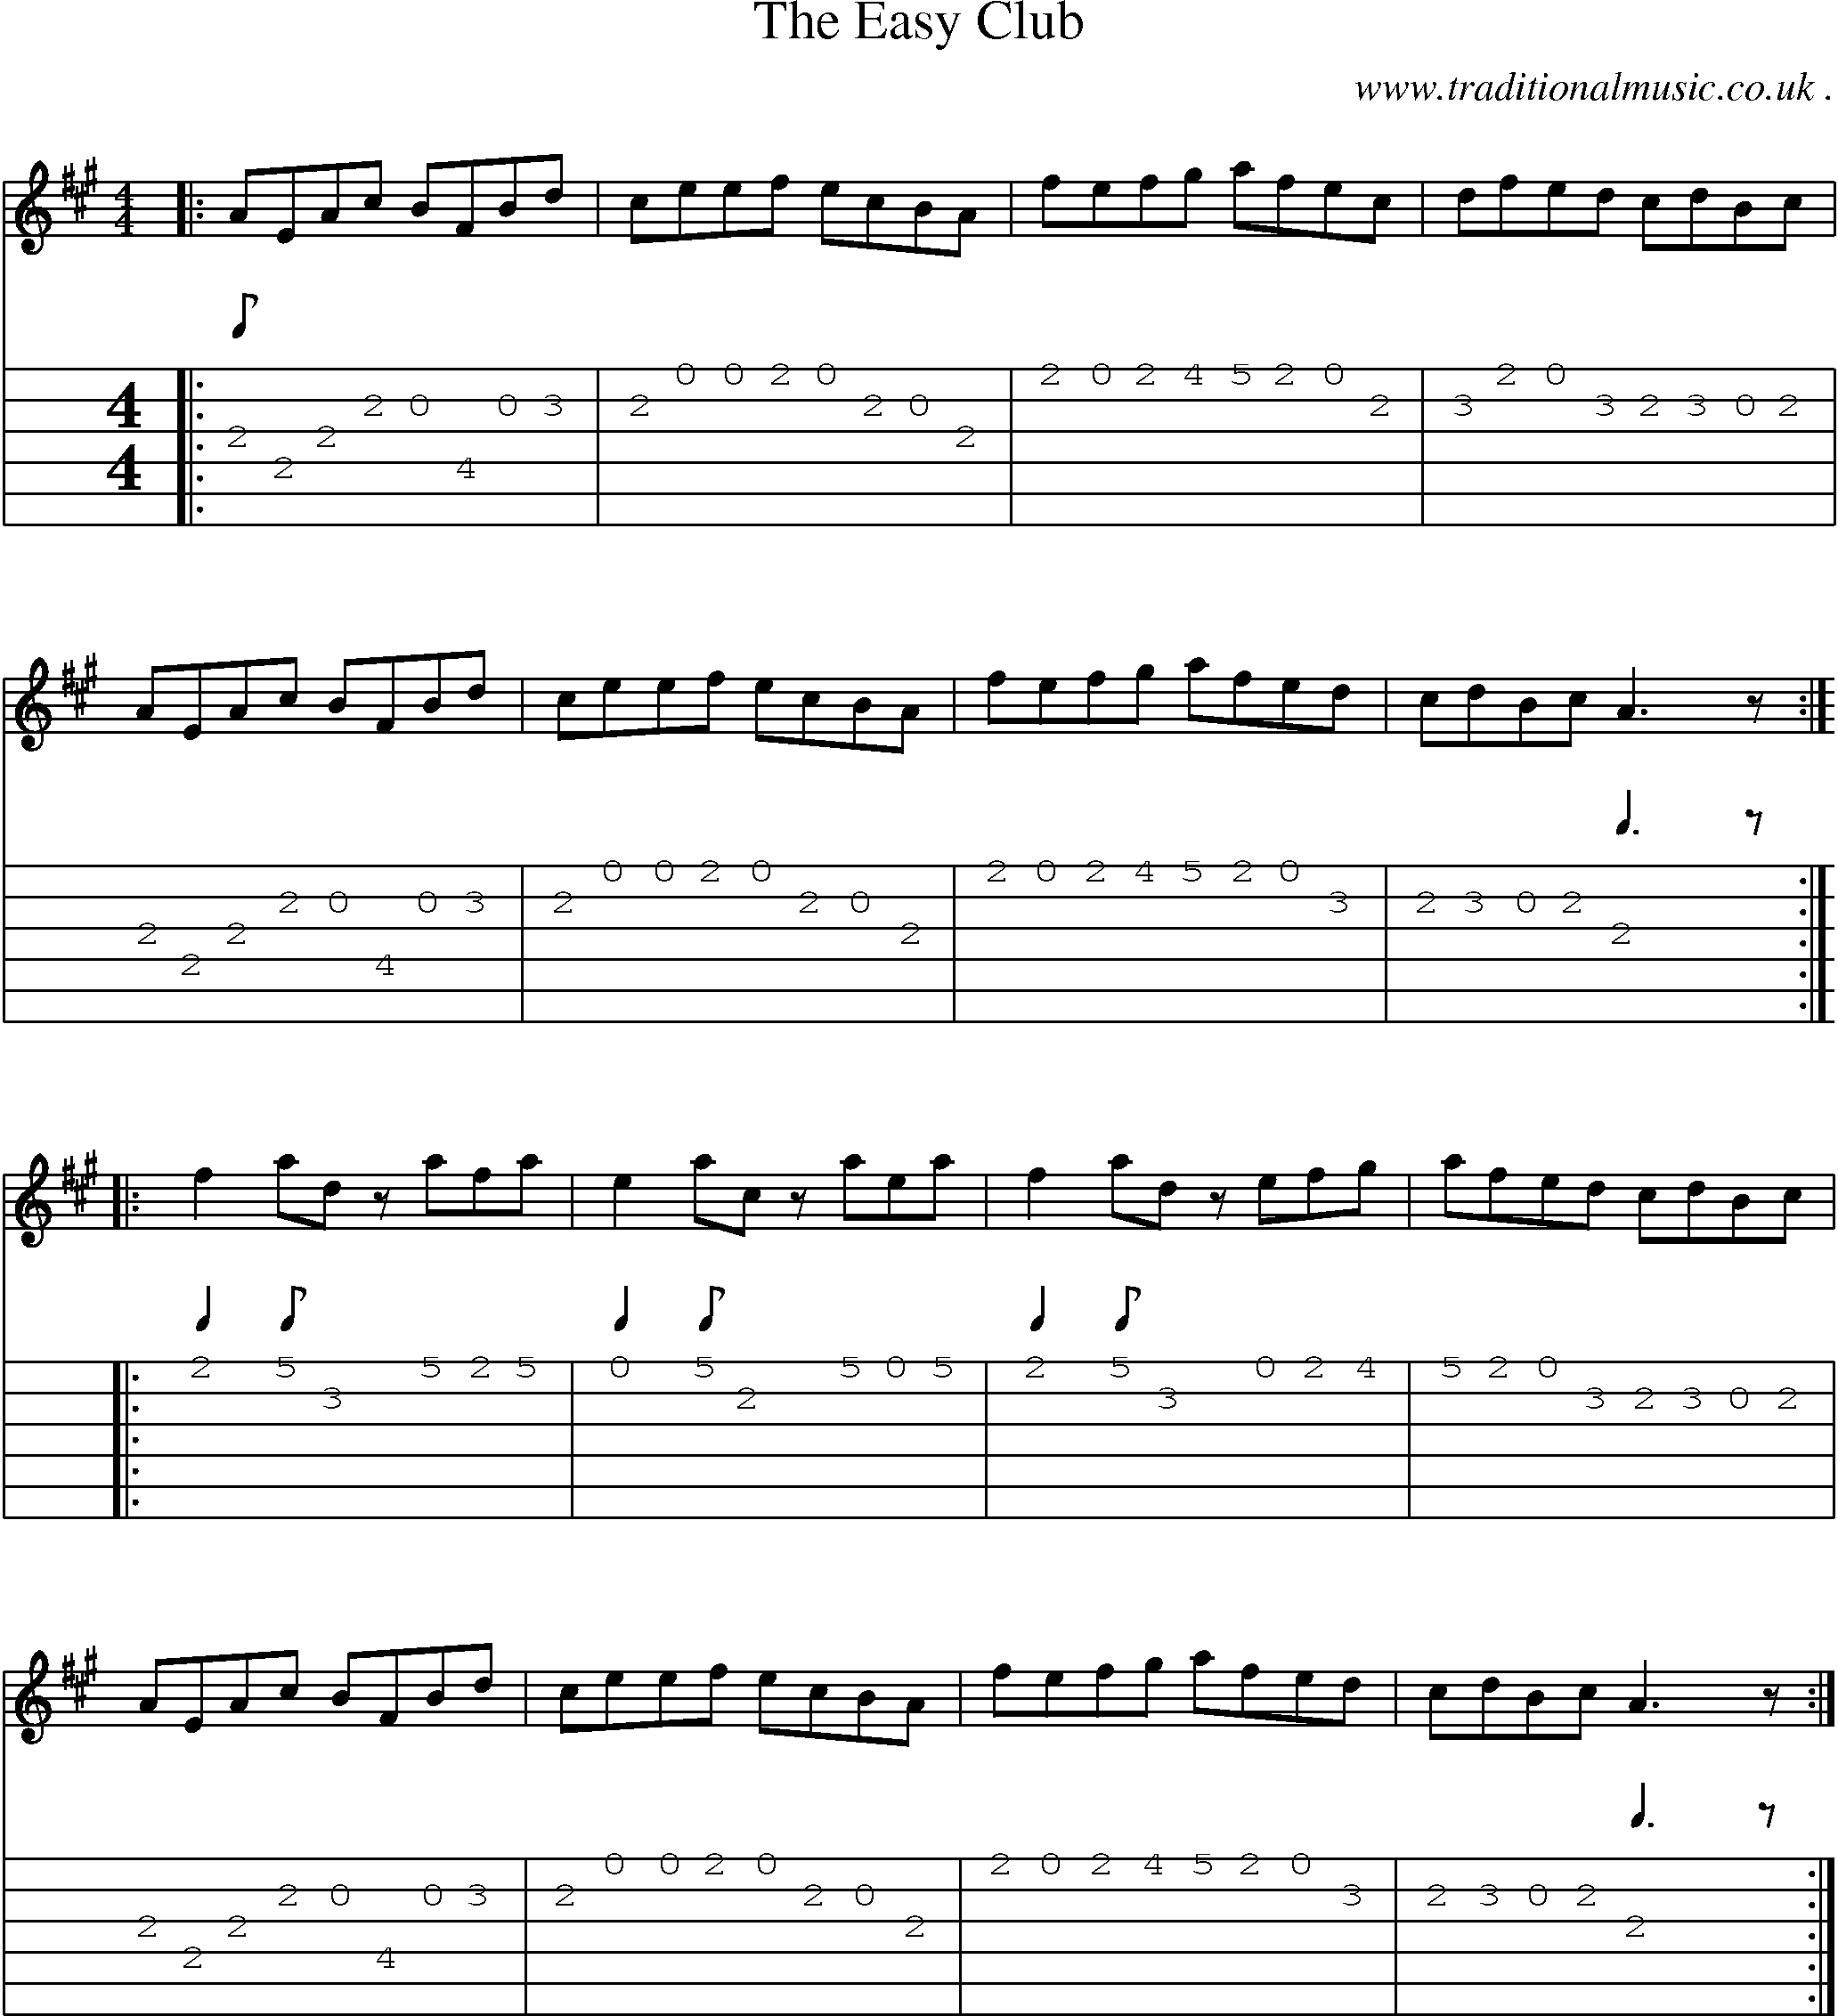 Sheet-Music and Guitar Tabs for The Easy Club